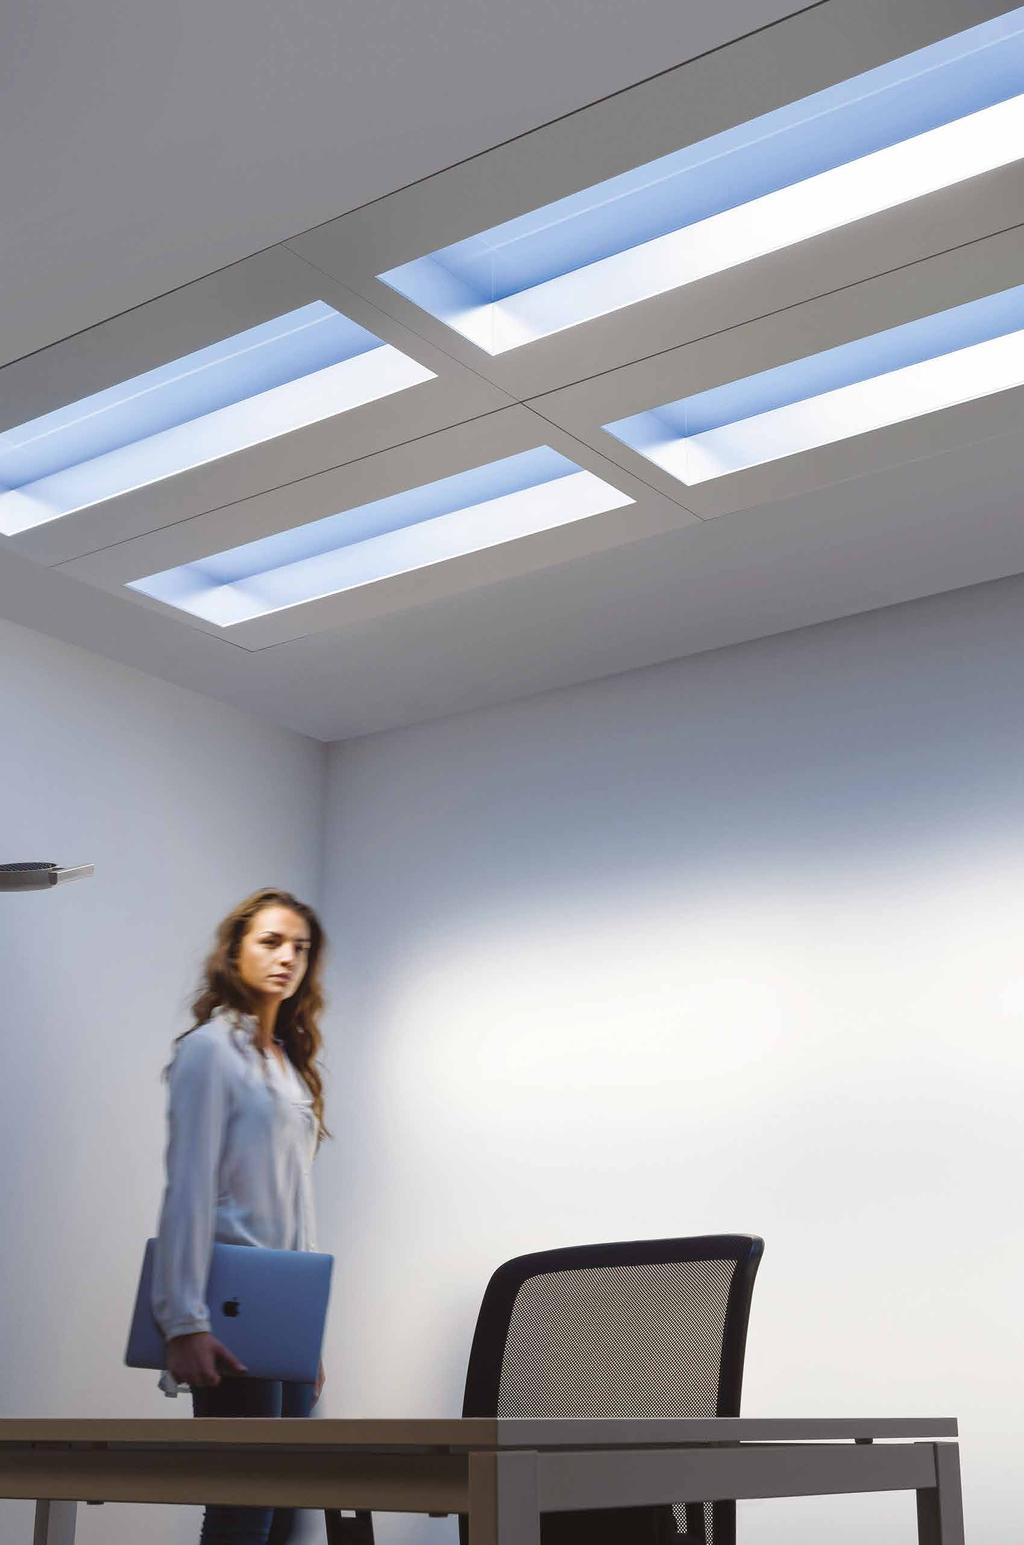 3 CoeLux LS ICE Datasheet CoeLux LS ICE can be installed as a single unit, as a modular system, or aligned in order to design hallways of light able to deliver depth or visual patterns.